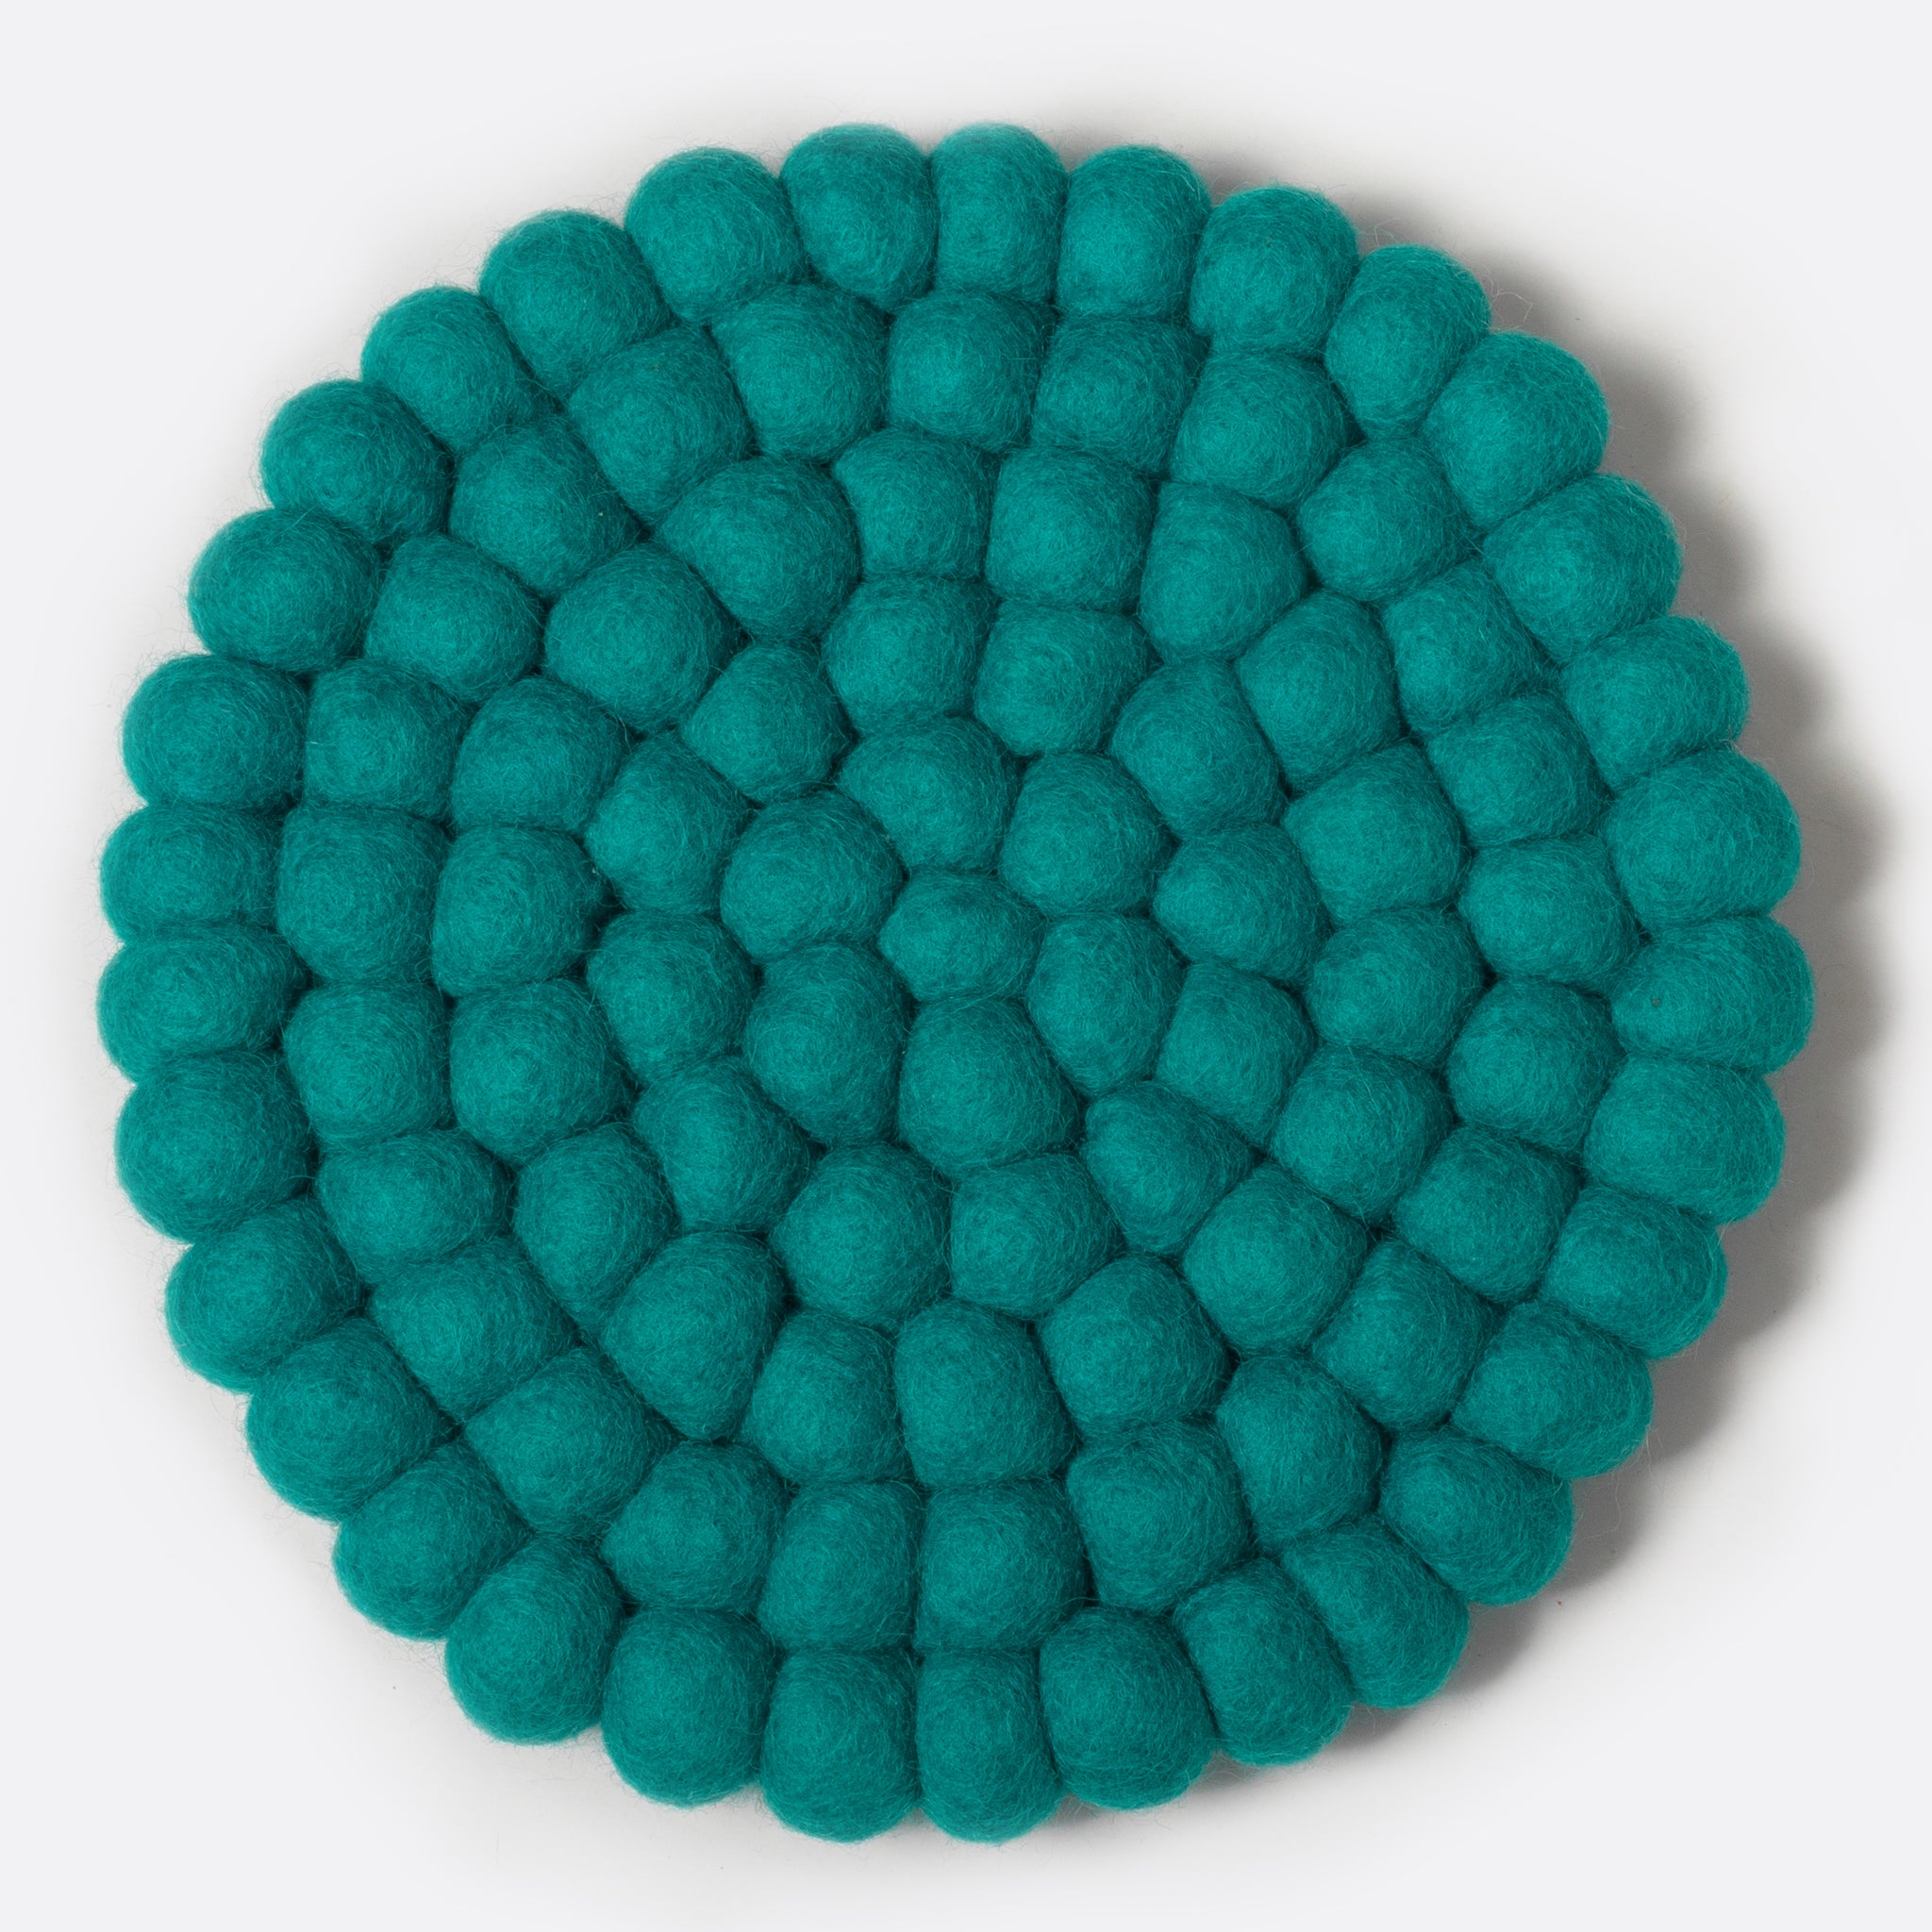 Round felt coaster which is made from little felt balls. The color is turquoise.